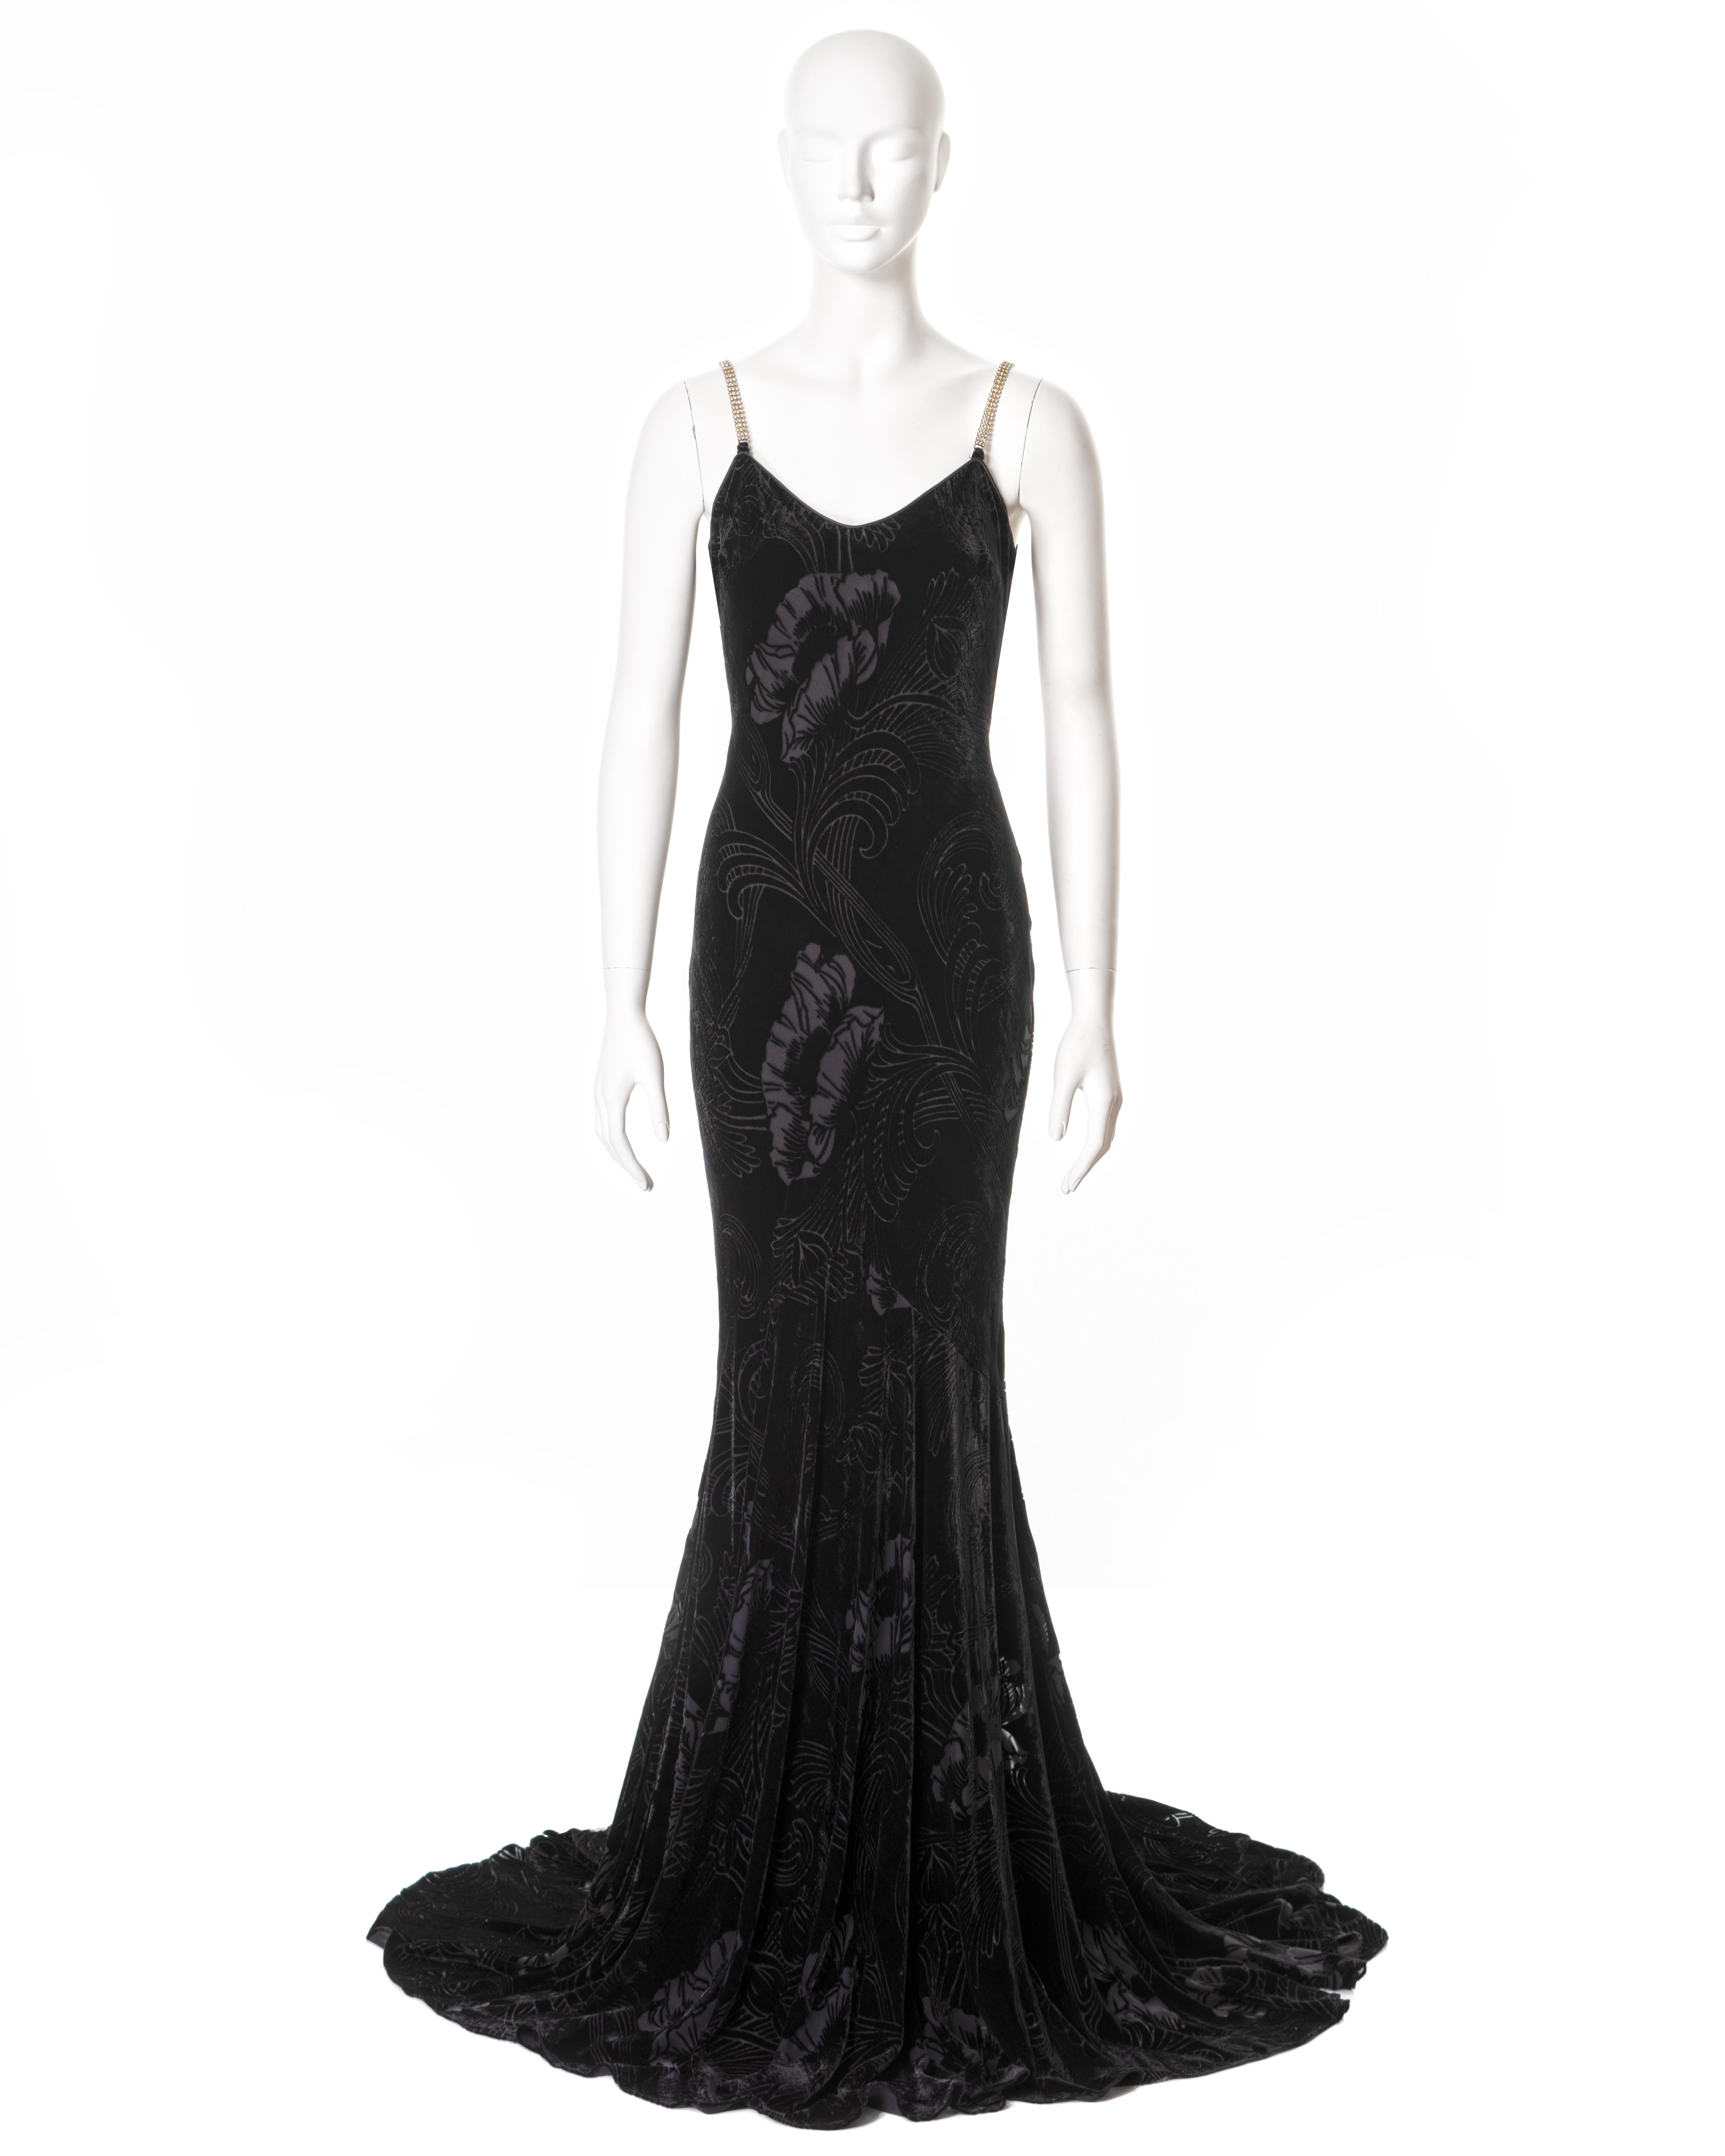 ▪ John Galliano evening dress
▪ Sold by One of a Kind Archive
▪ Spring-Summer 2003
▪ Constructed from bias-cut black cut-velvet with floral motifs 
▪ Crystal shoulder straps 
▪ Floor-length skirt with train
▪ FR 42 - UK 14 - US 8
▪ Made in